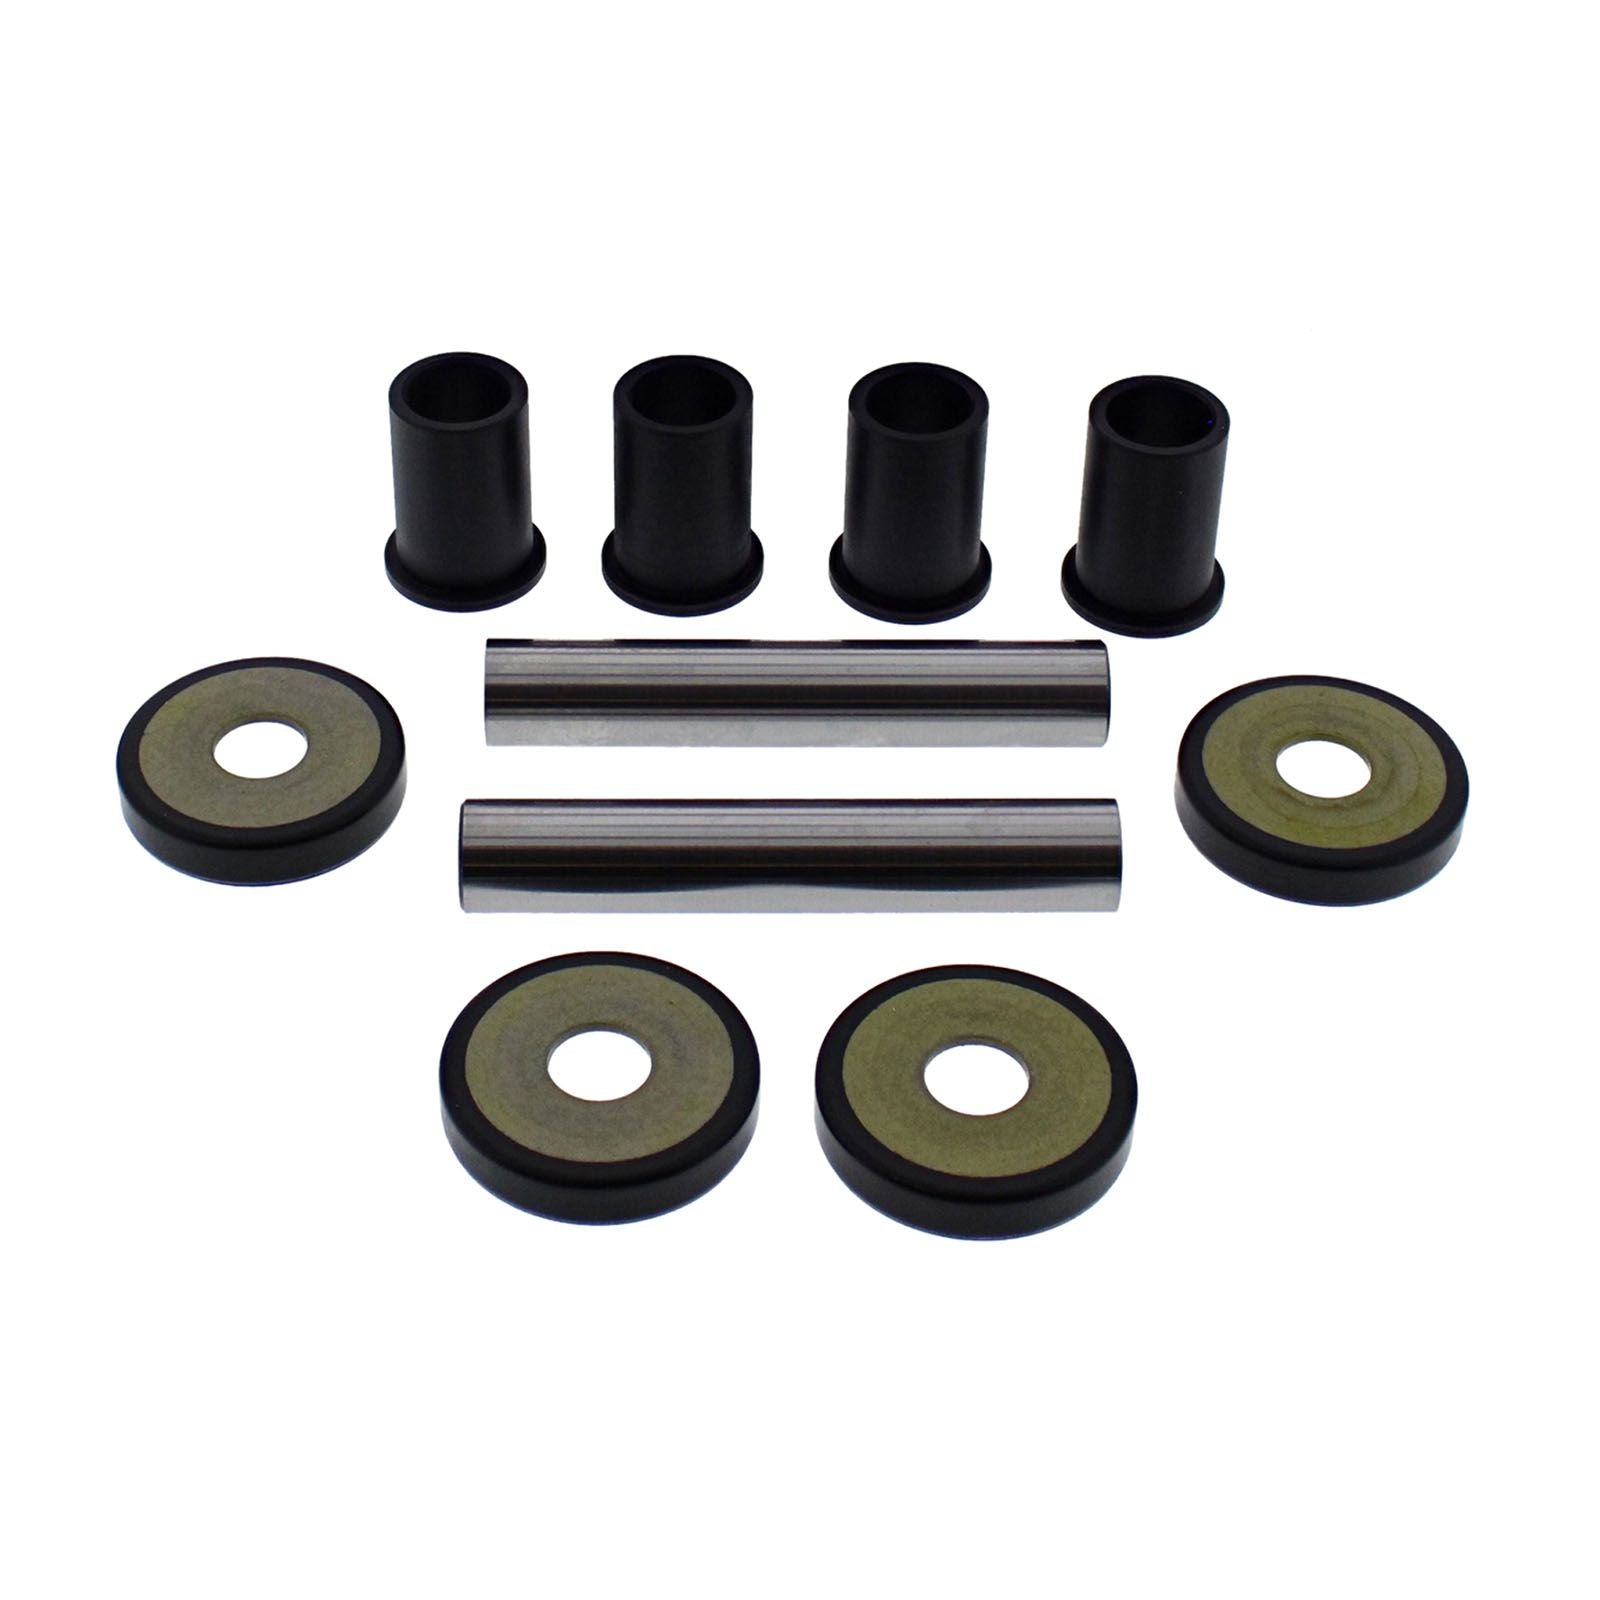 New ALL BALLS Racing Independent Suspension Knuckle Only Kit - Rear #AB501229